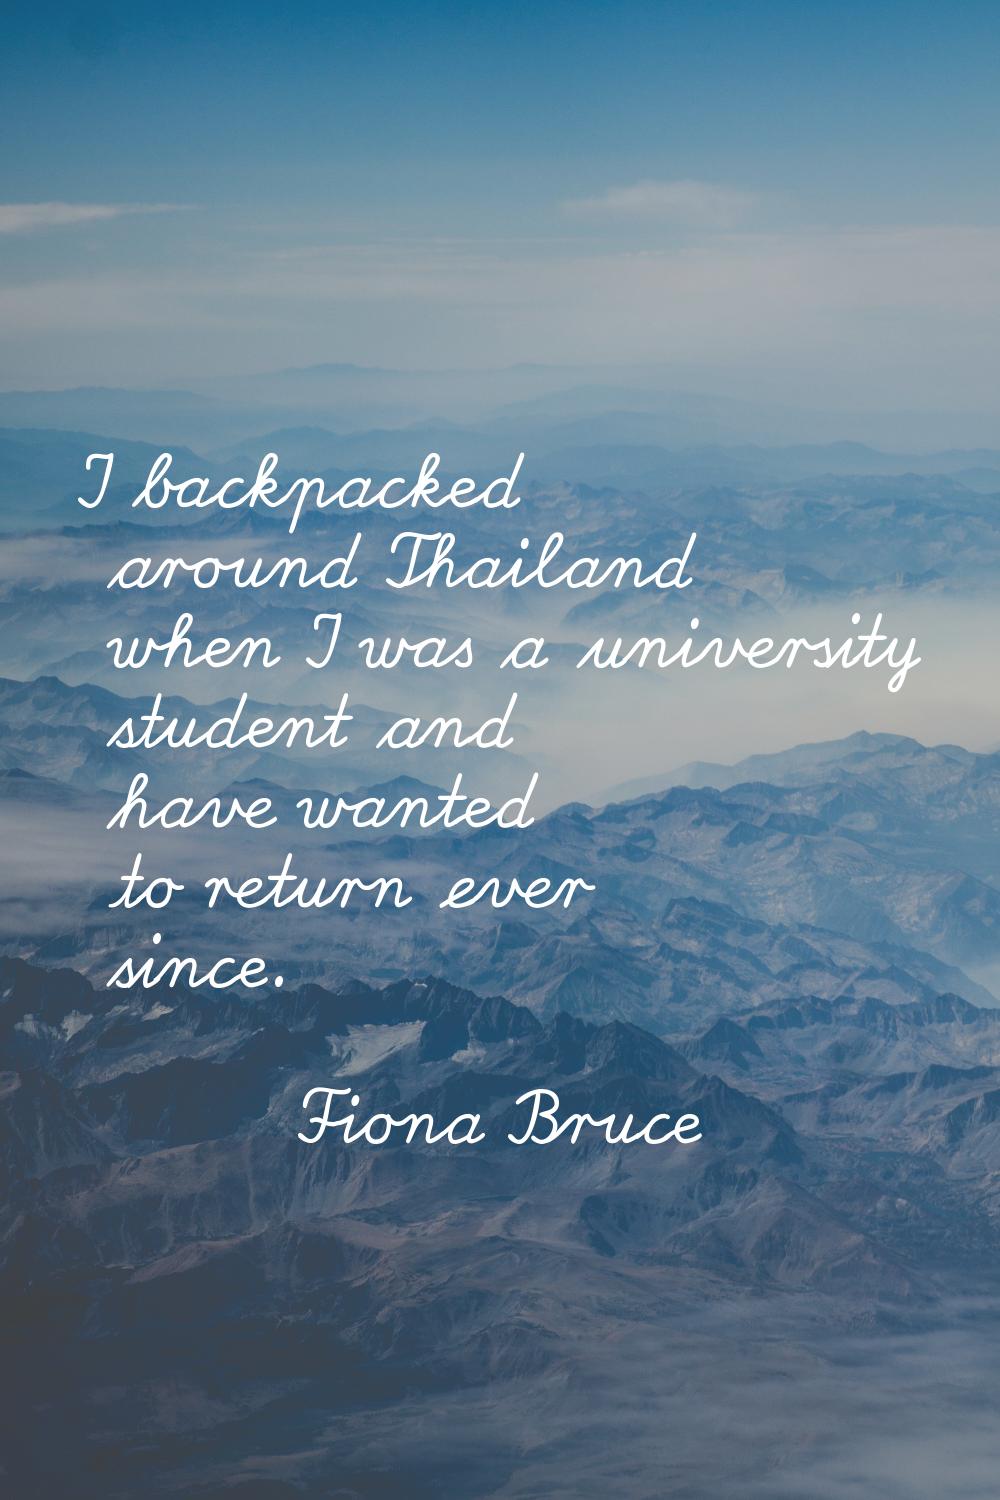 I backpacked around Thailand when I was a university student and have wanted to return ever since.